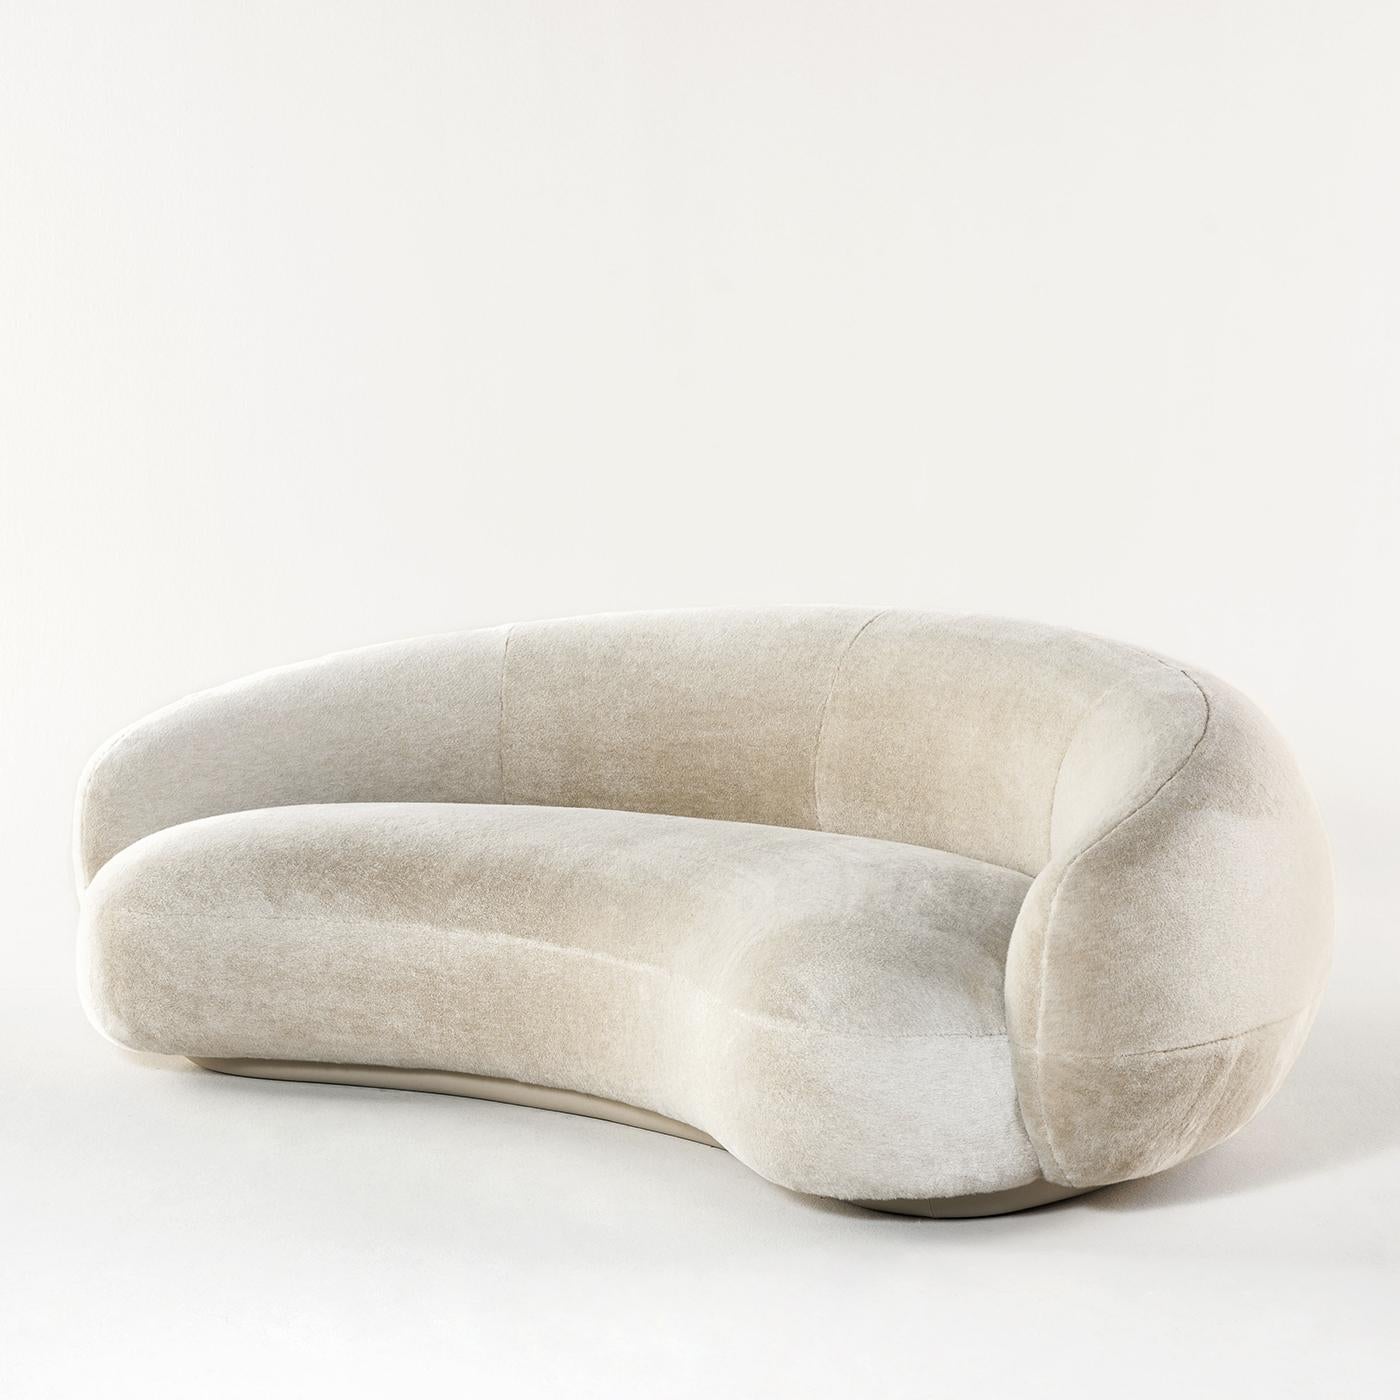 Part of the Julep collection designed by Jason Wagell, this sofa boasts a refined allure that combines a contemporary silhouette with a romantic and feminine flair. The generous seat, with its plush 42 cm high cushion, and the elegant curve of its